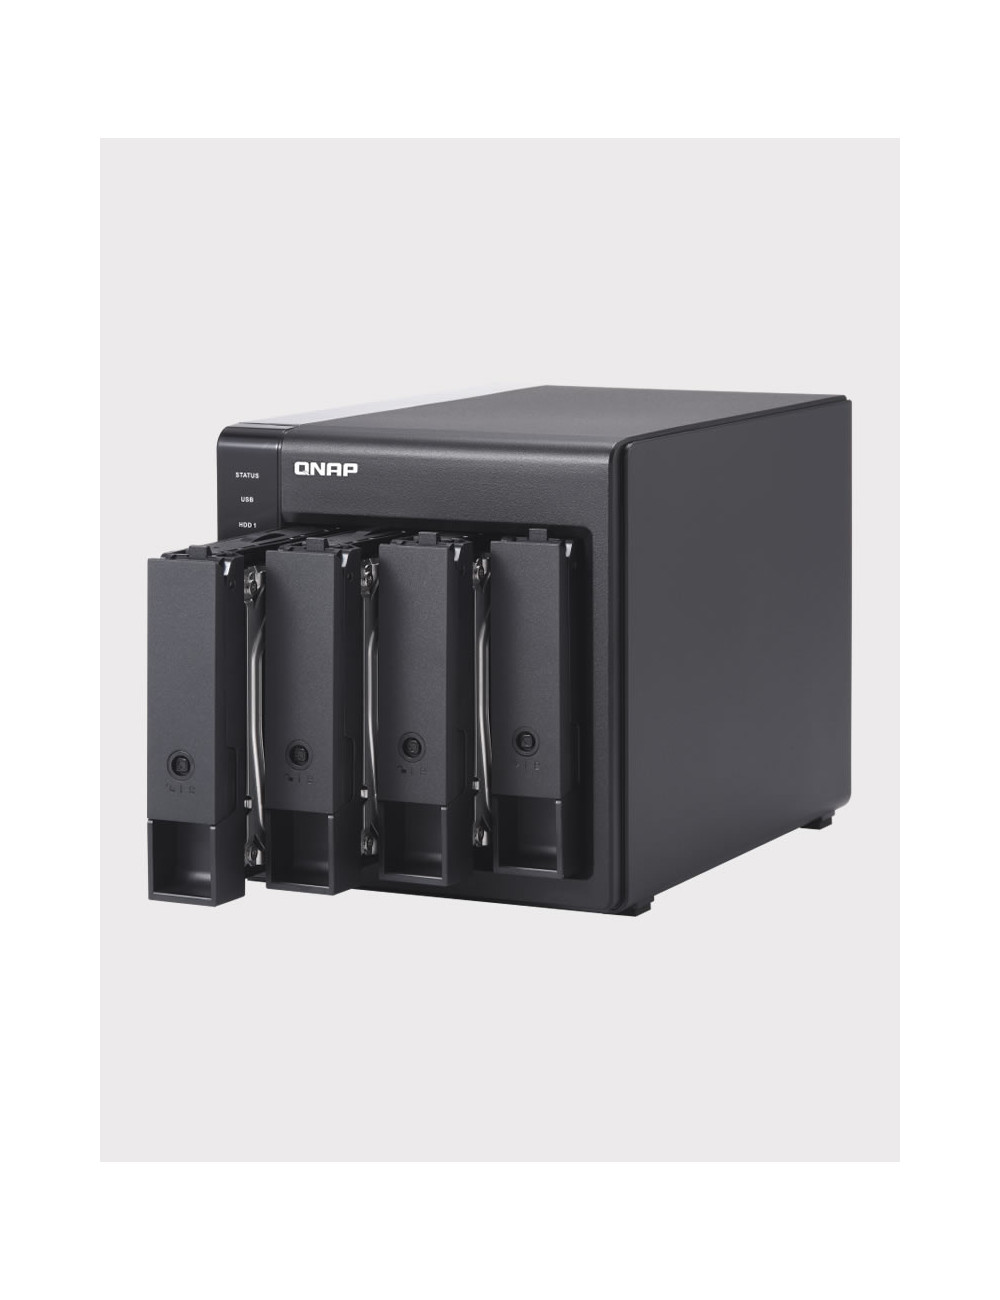 Synology DS920+ 8GB Serveur NAS IRONWOLF PRO 64To (4x16To)